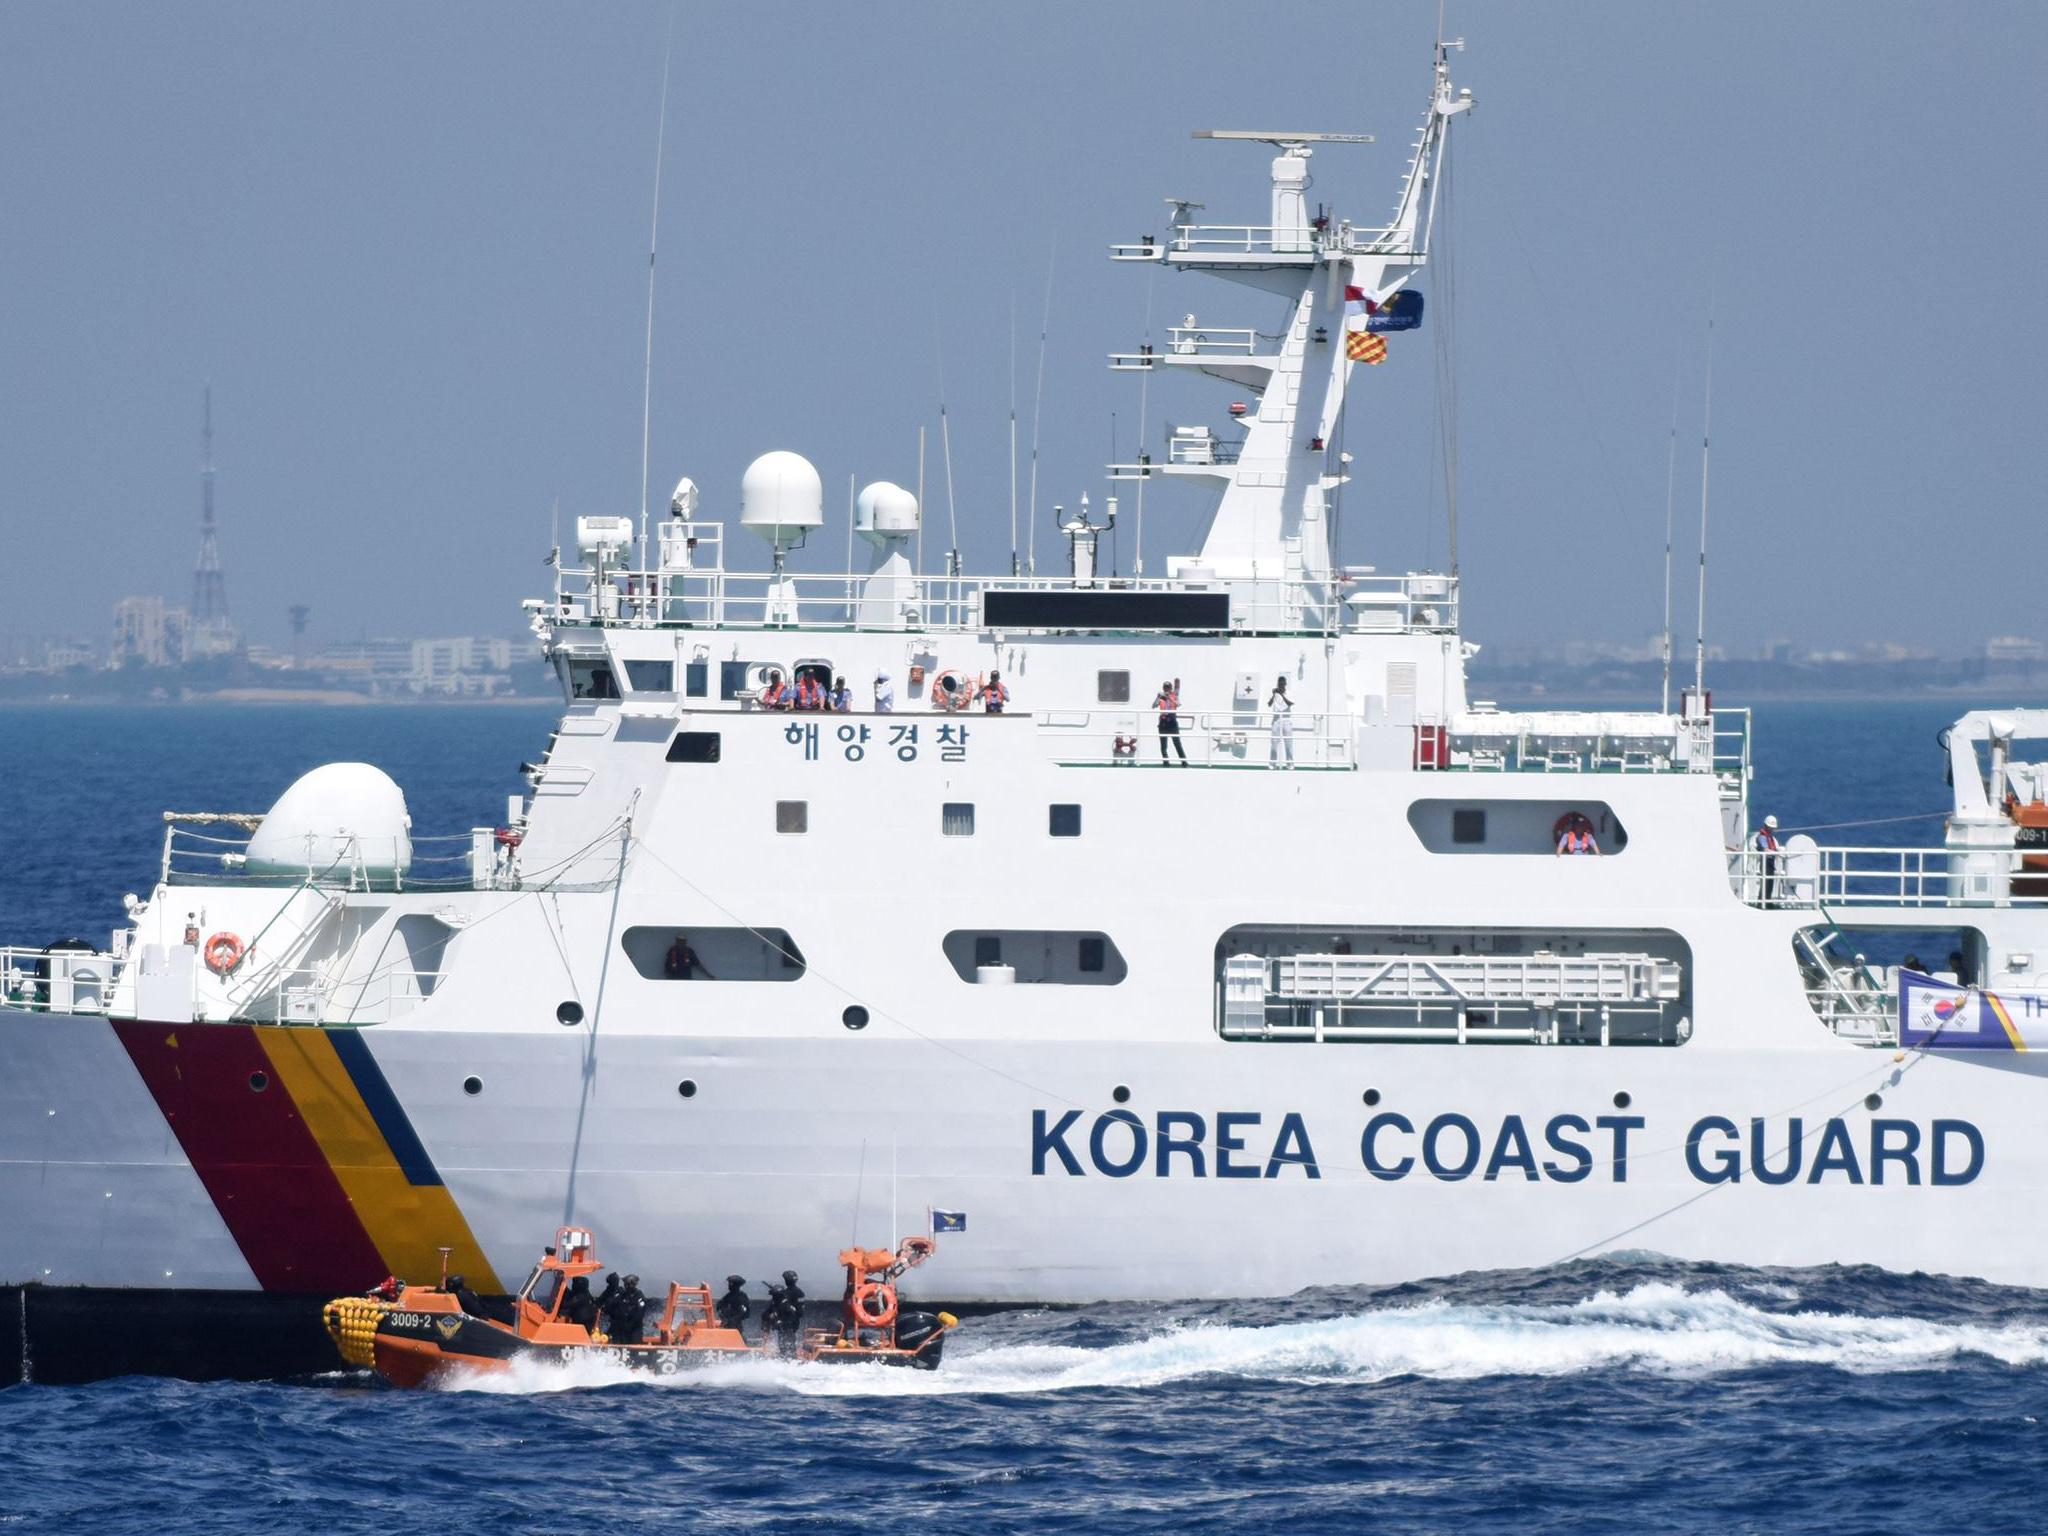 The South Korean coast guard was involved in an aggressive altercation with Chinese fishing vessels